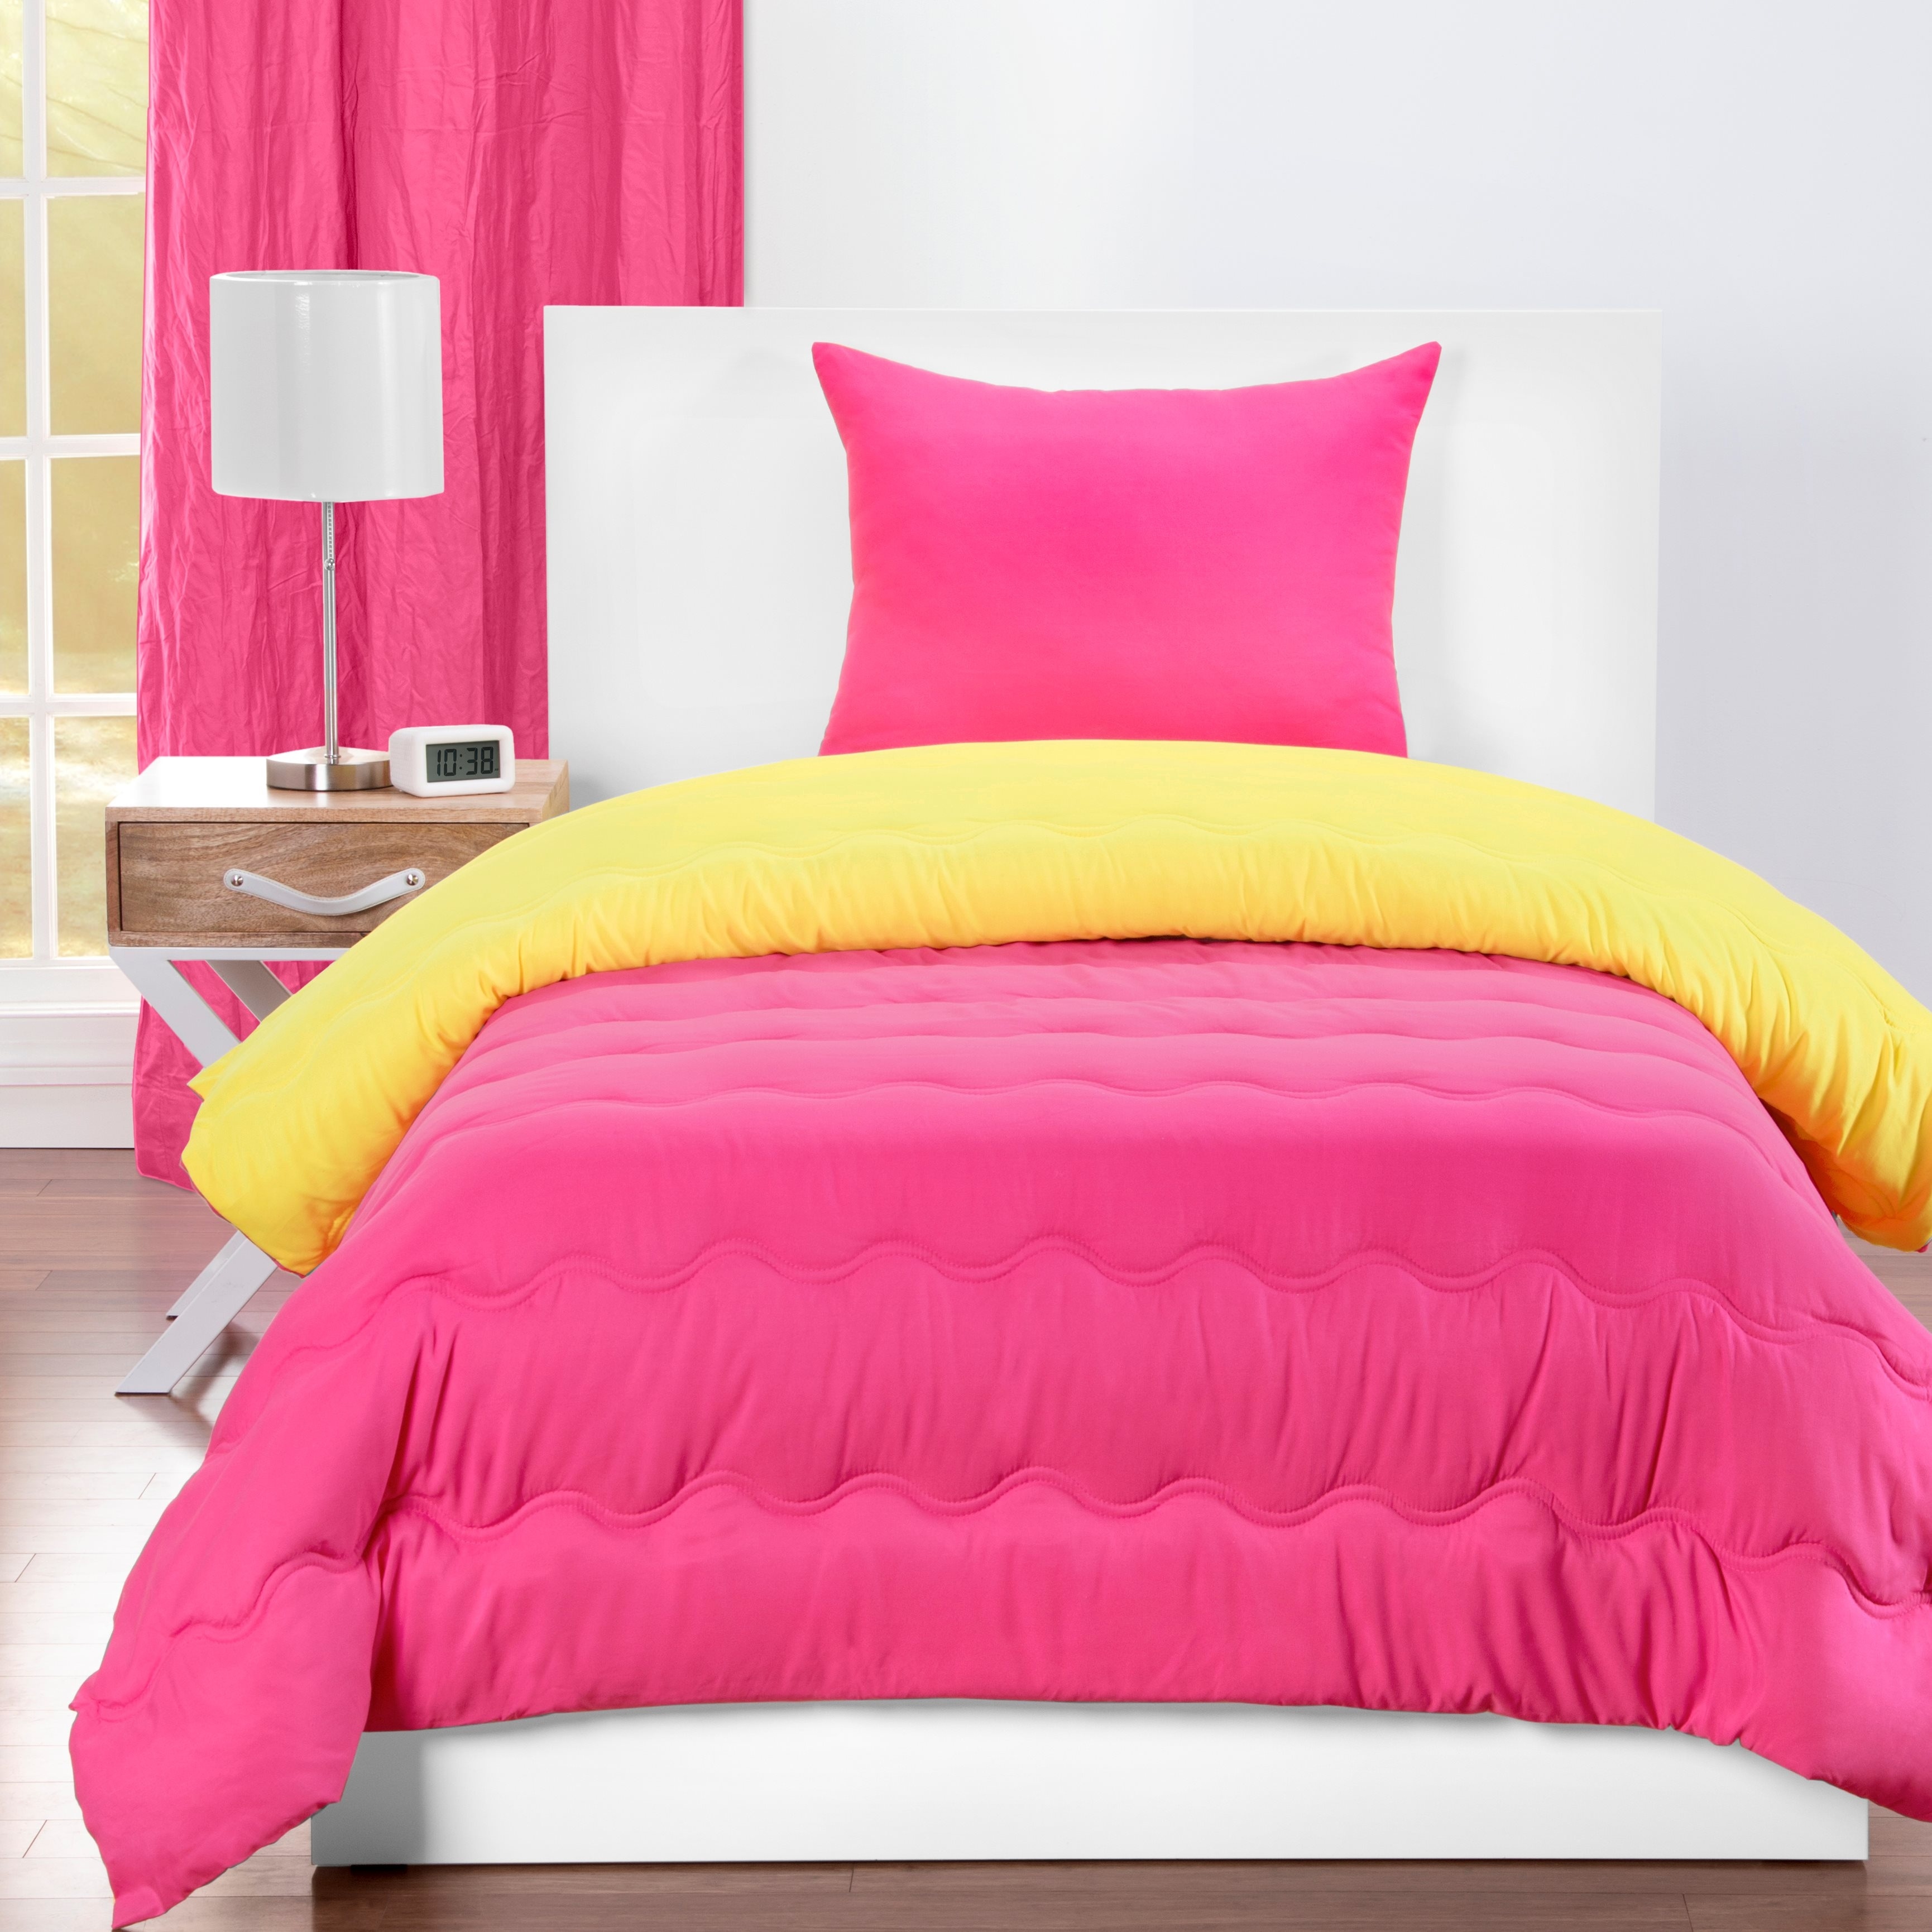 Hot Pink and Yellow Reversible Comforter Set - On Sale - Bed Bath & Beyond  - 37485508